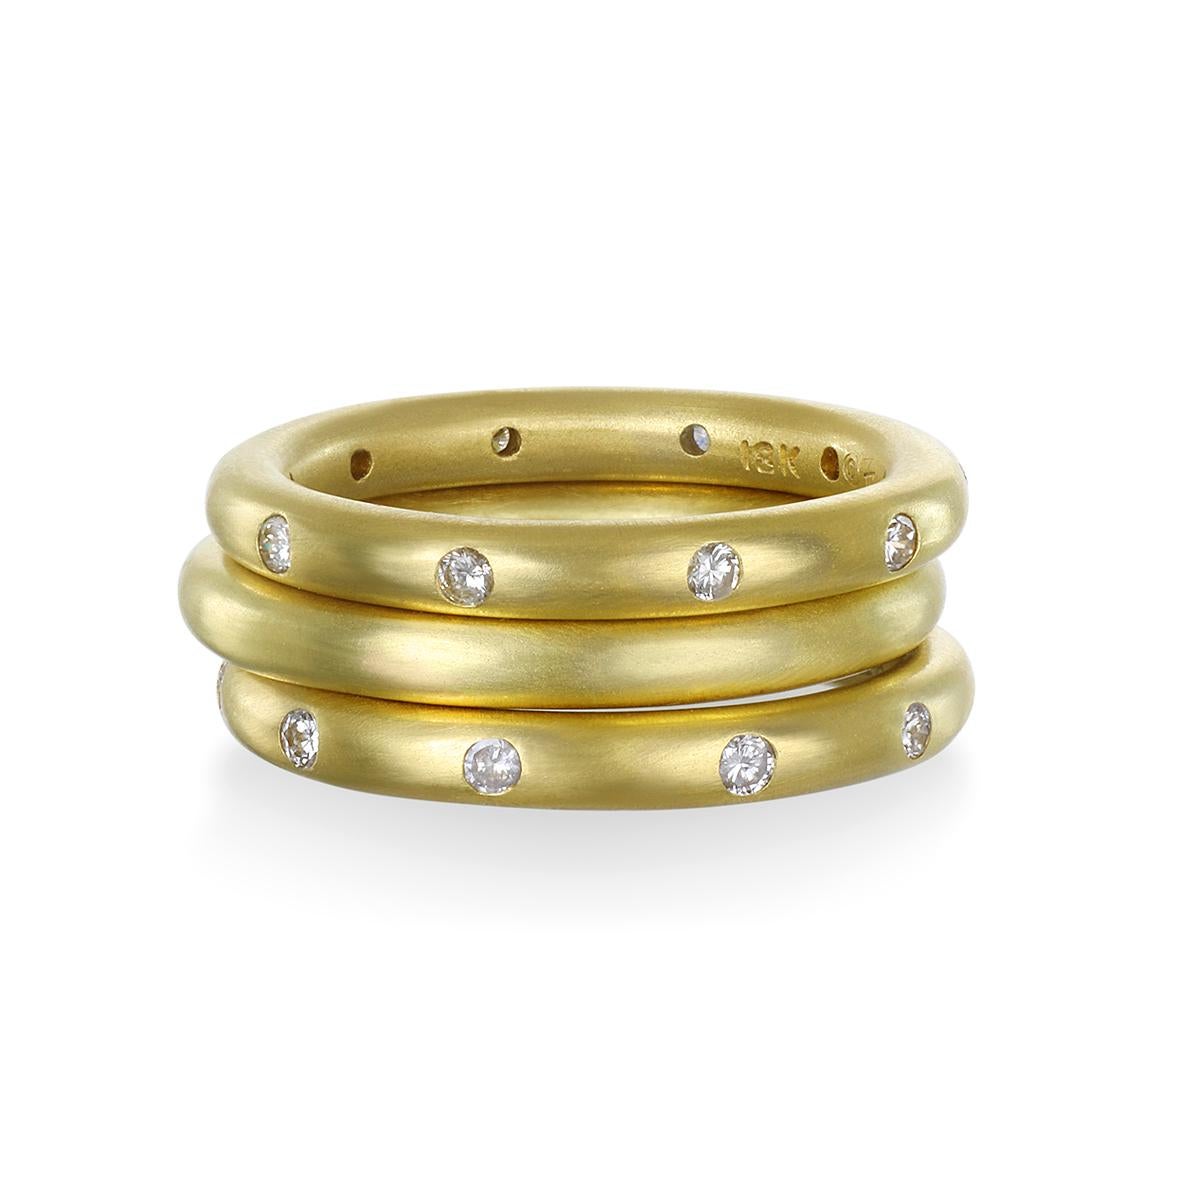 The bright white burnished diamonds in Faye Kim's 18 karat gold band ring shines brightly and is a perennial favorite from her signature collection. Endless possibilities to wear, stack, and enjoy!

Sizes: 6 and 7.5 available; can be resized
Width: